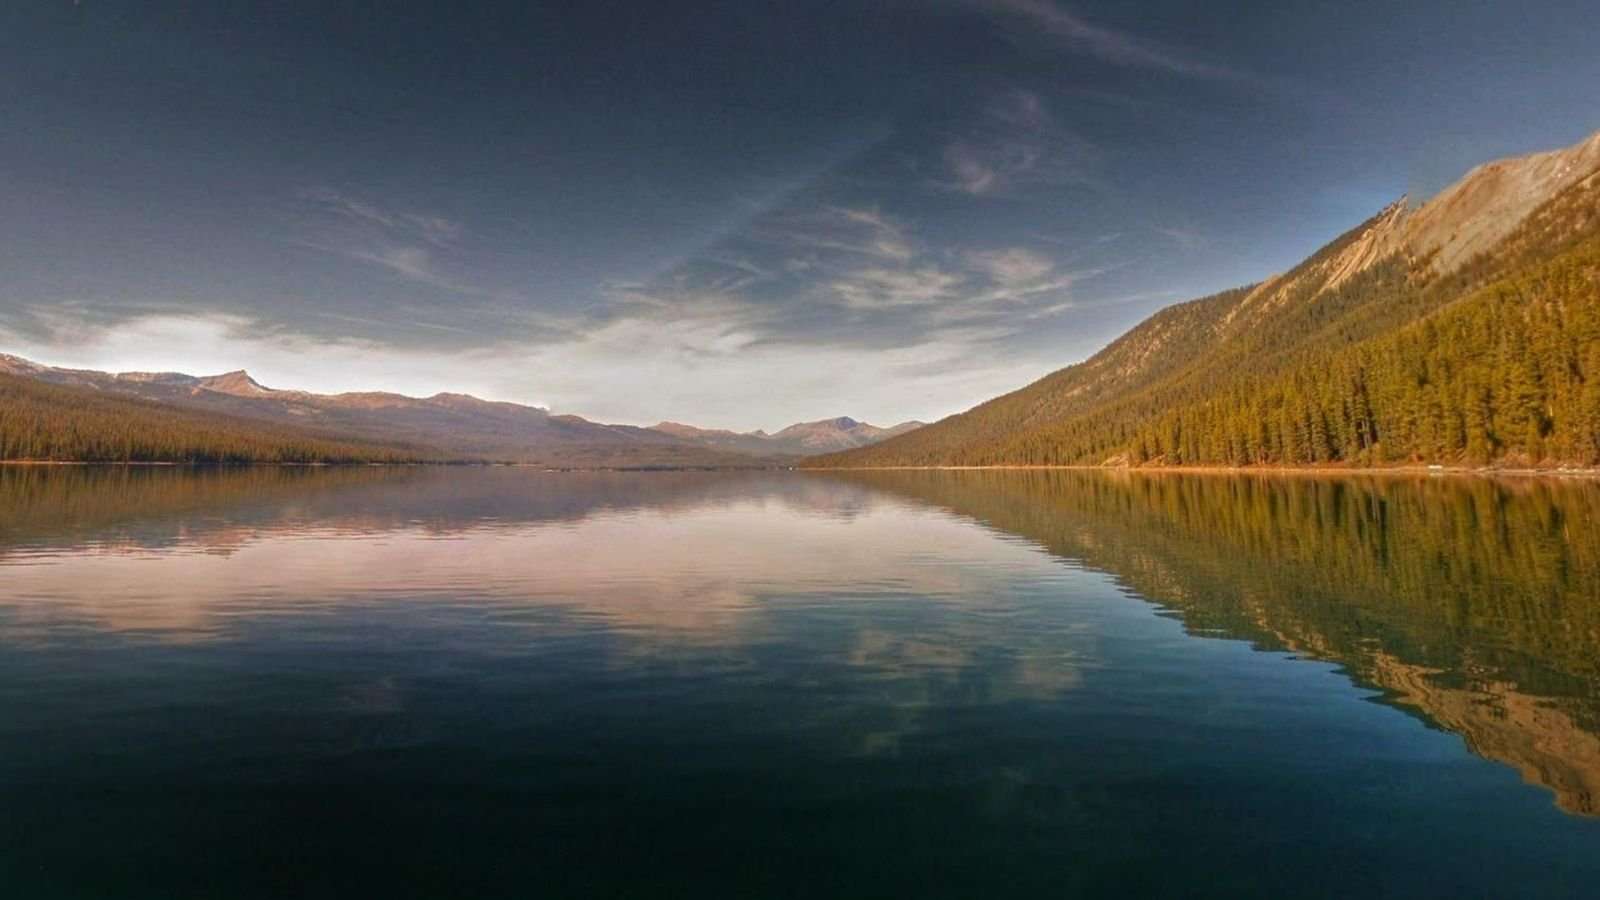 image for Google is using AI to create stunning landscape photos using Street View imagery